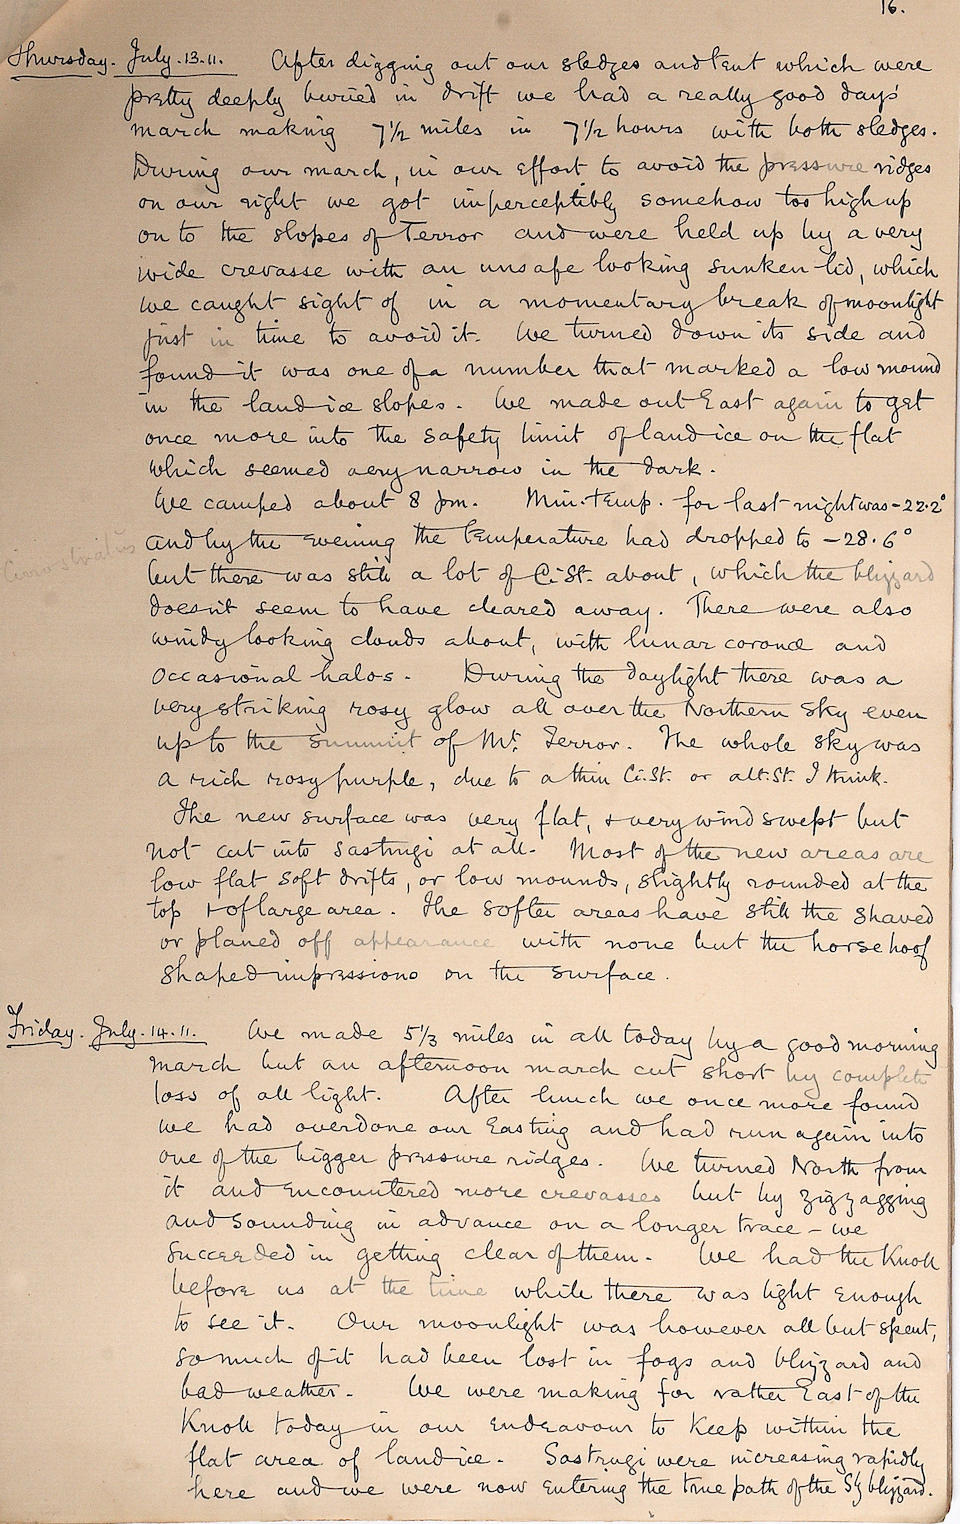 WILSON (EDWARD ADRIAN) Edward Wilson's autograph manuscript of his report on the celebrated winter journey to the Emperor Penguin rookery at Cape Crozier 'General Account of Journey from Cape Evans to Cape Crozier June 27. 1911 to Aug. 1. 1911',